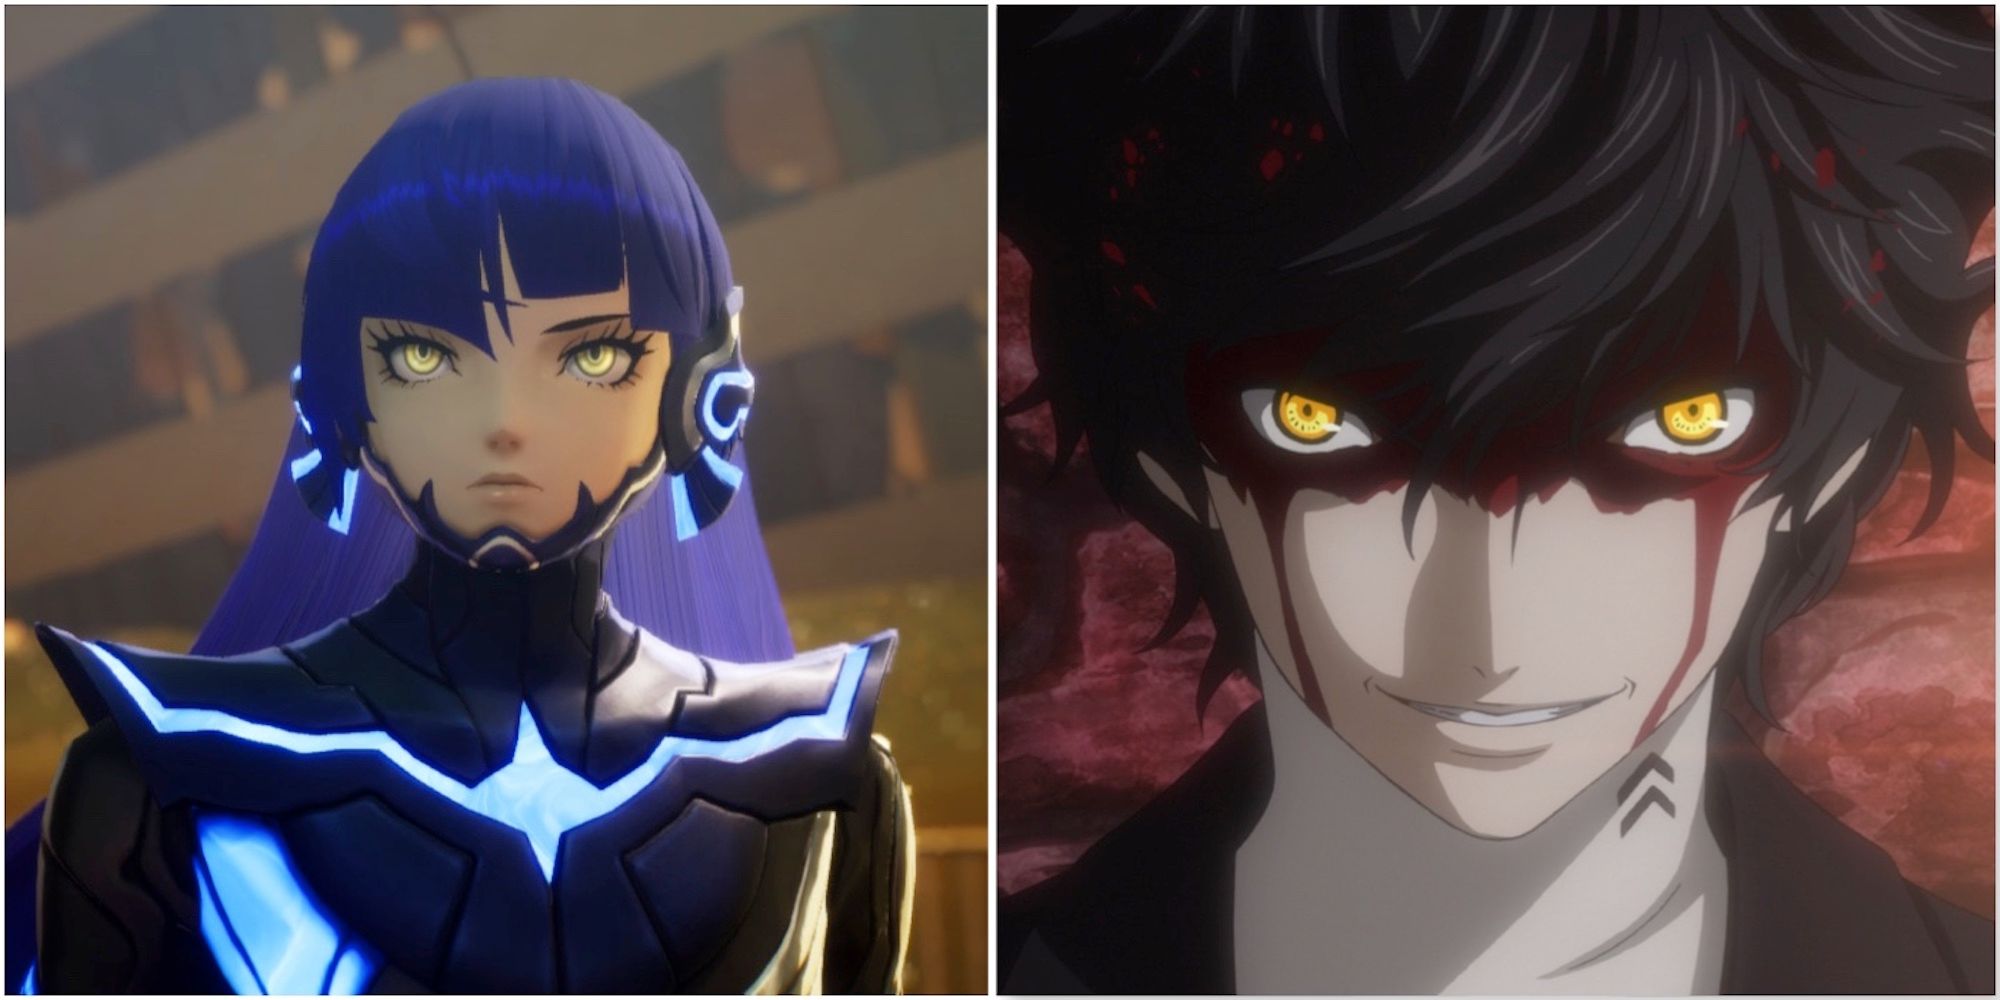 The main characters from Shin Megami Tensei 5 and Persona 5